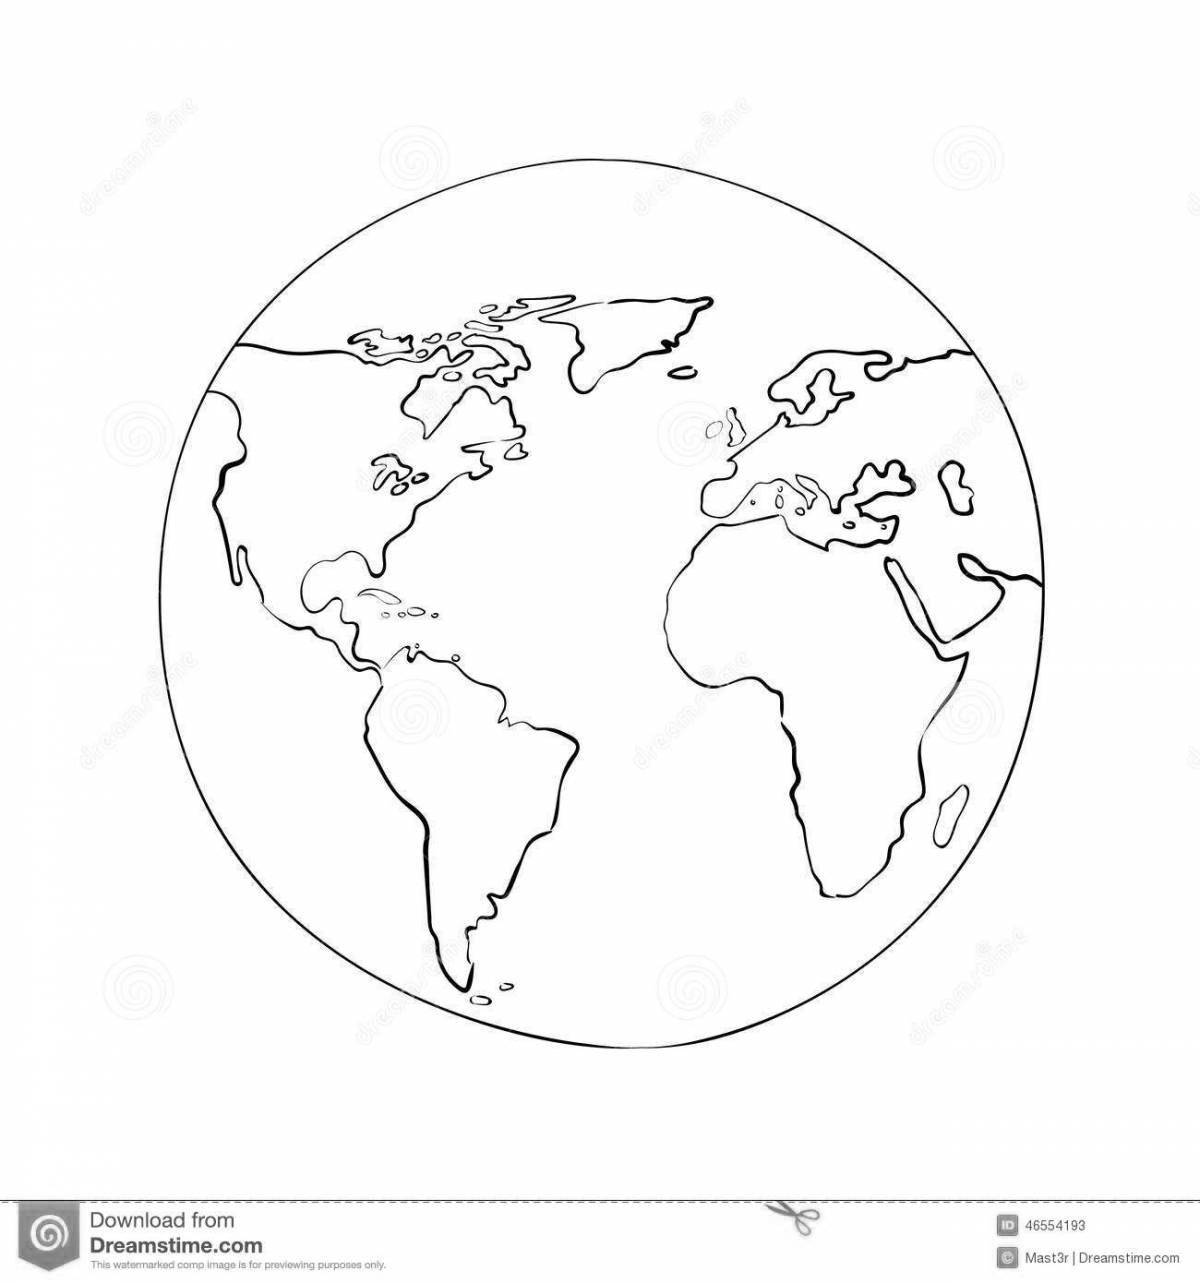 Amazing earth map coloring page